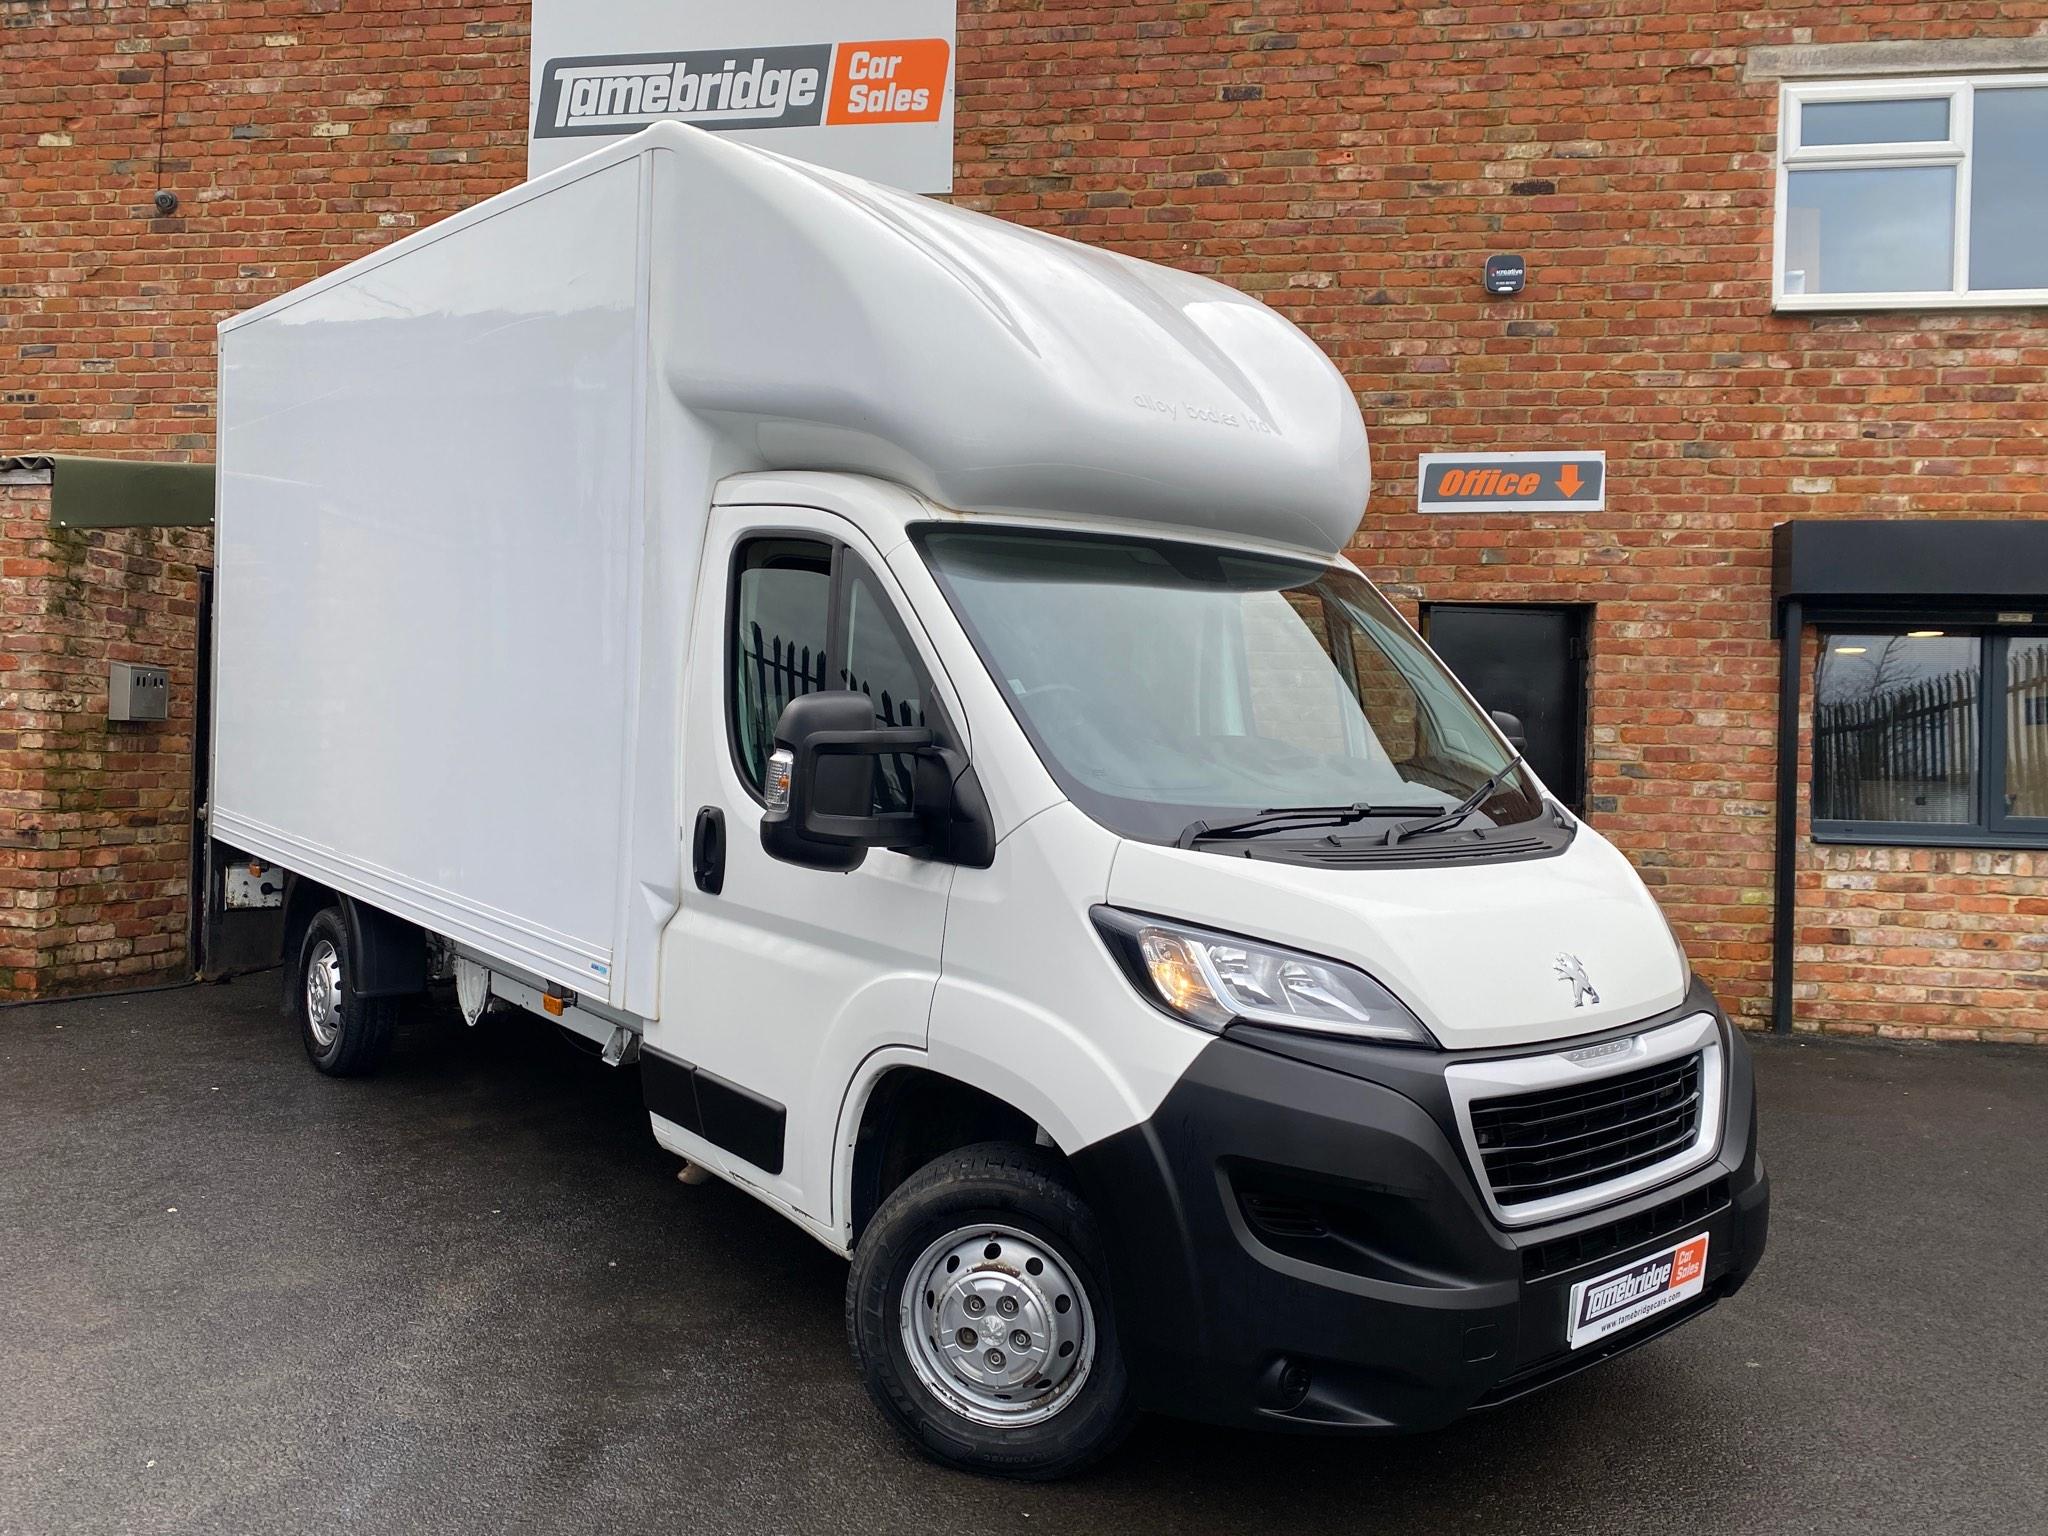 Used Peugeot Boxer Vans for sale